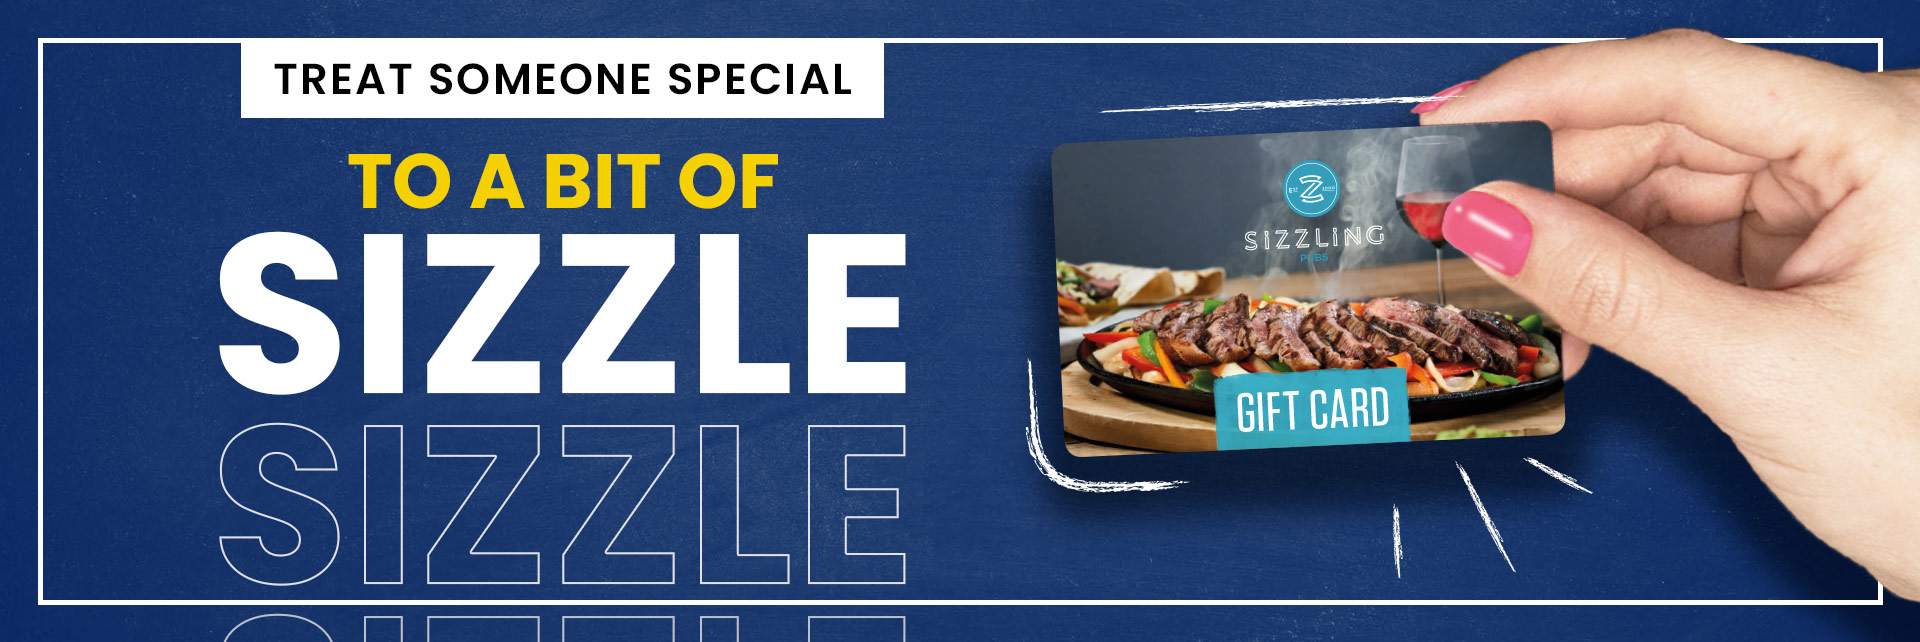 Sizzling Pubs Gift Card at Podger in Garforth